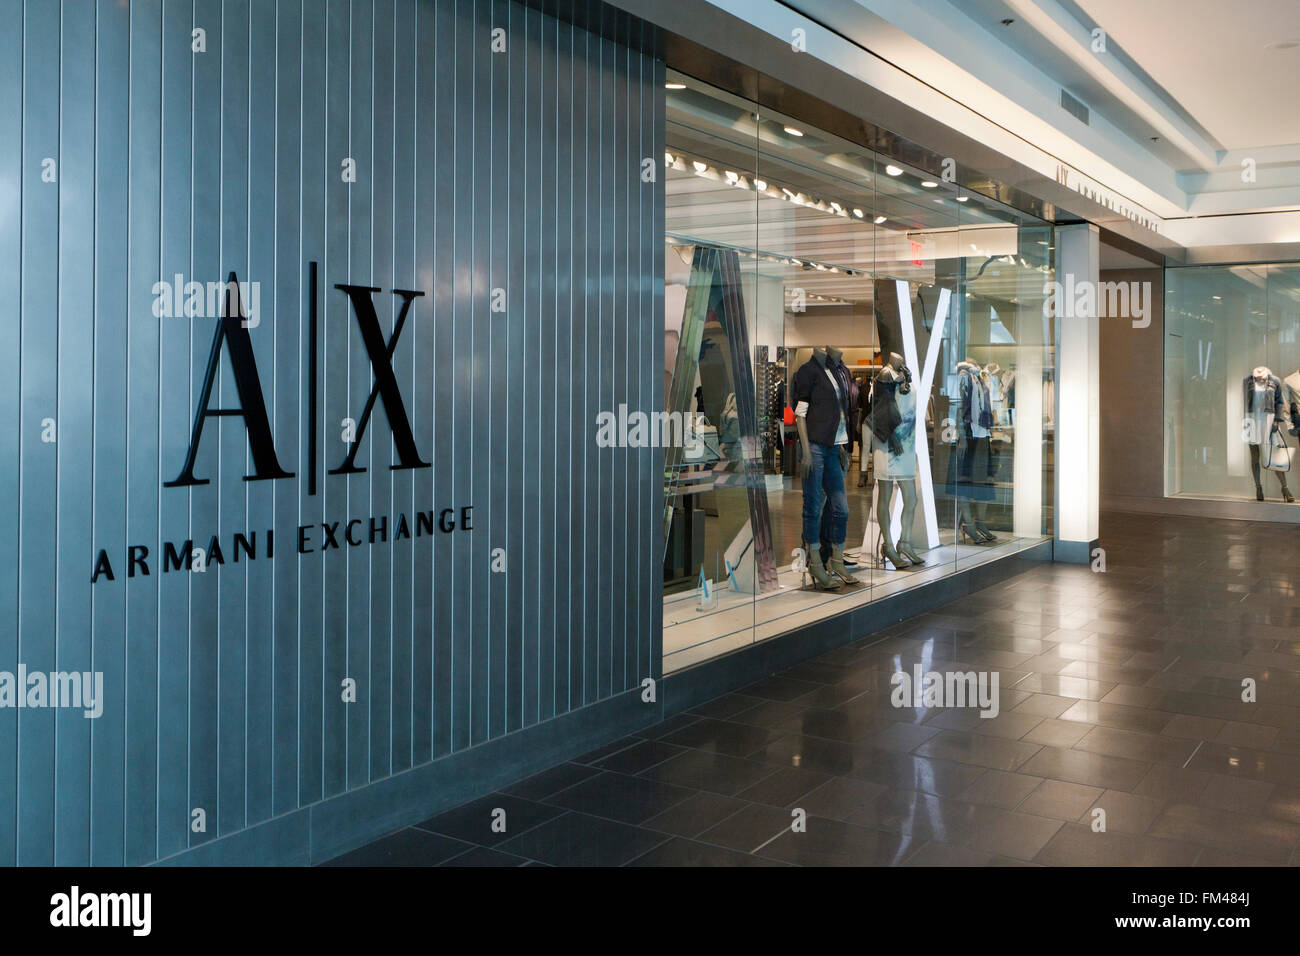 A x armani exchange hi-res stock photography and images - Alamy